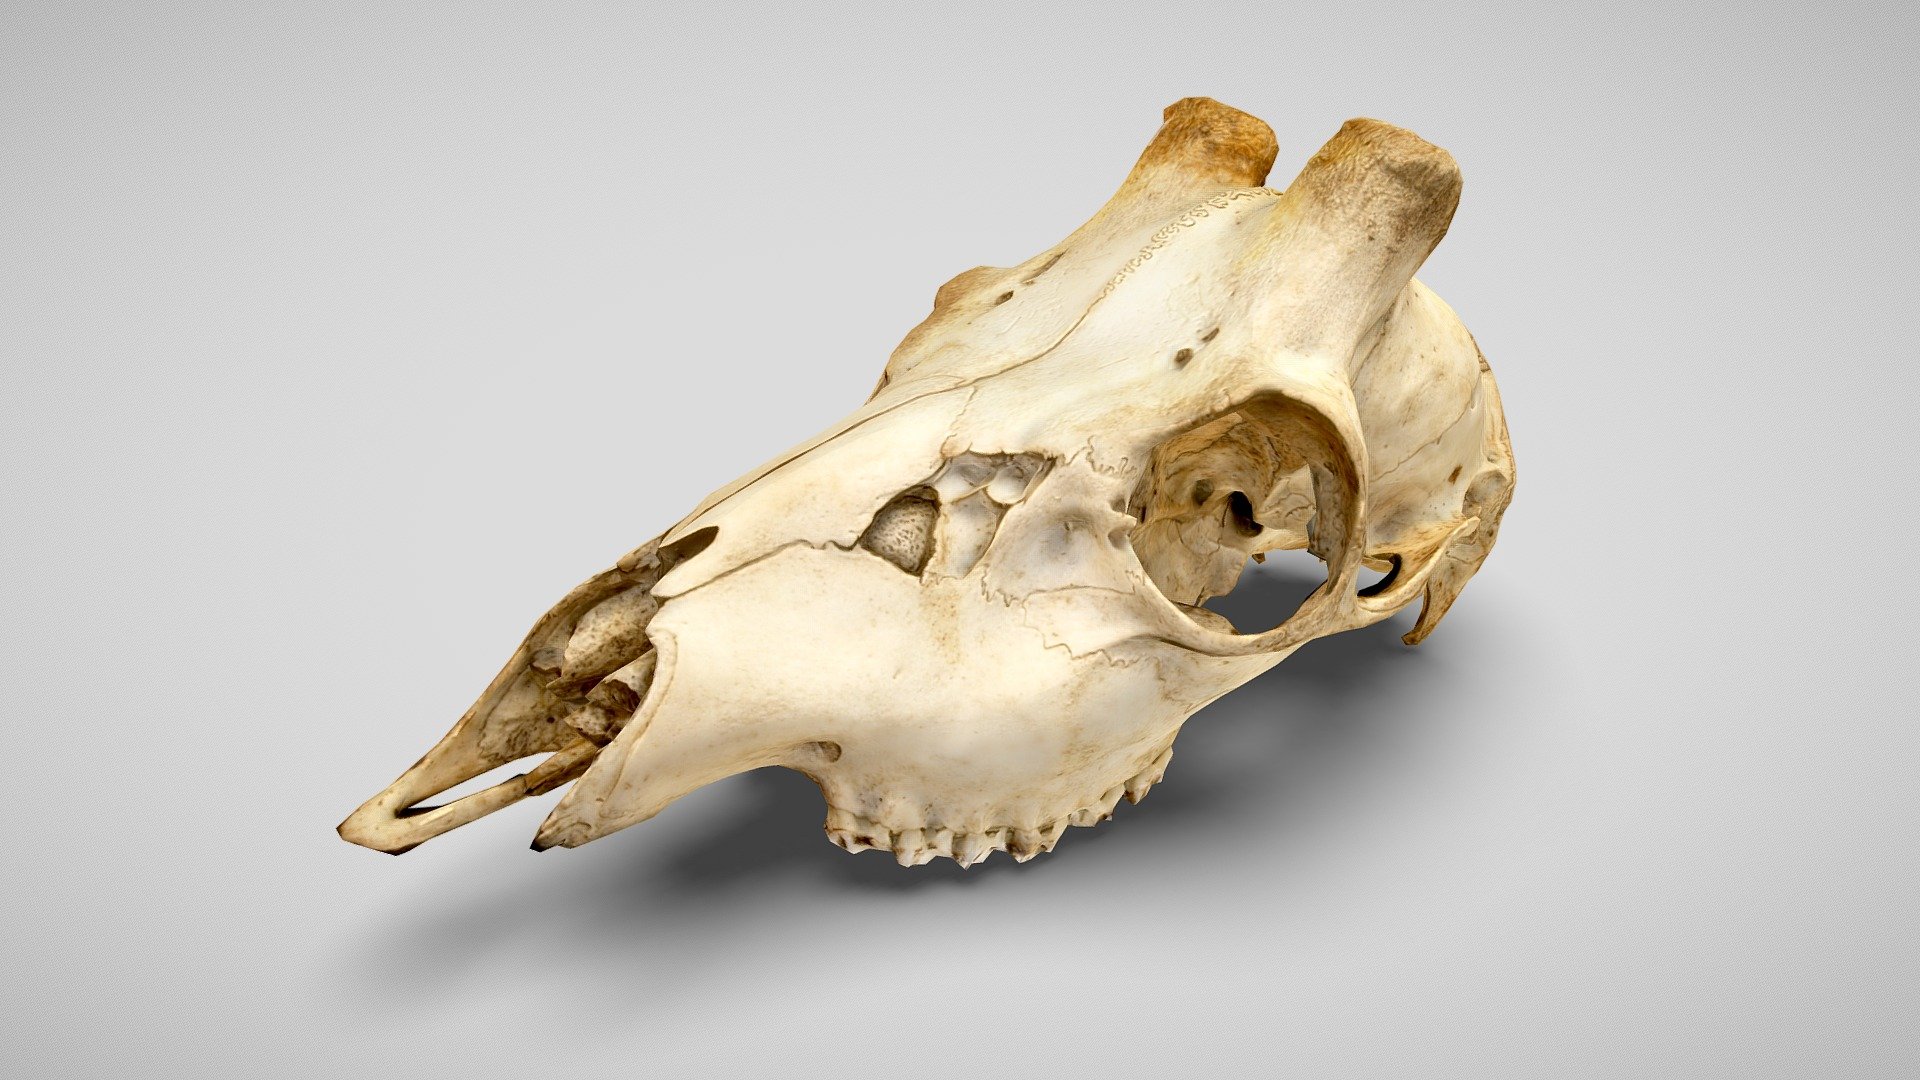 The skull of a roe deer, Capreolus capreolus. Missing the mandible and absent any antlers. Found by a roadside in the North York Moors, presumably the victim of a car. Perfect for fiddling about with photogrammetry. Pushed the poly count down, trying to make some more useful assets in a studio setting.

70 images shot with an Olympus DLSR. Processed in Metashape 3d model